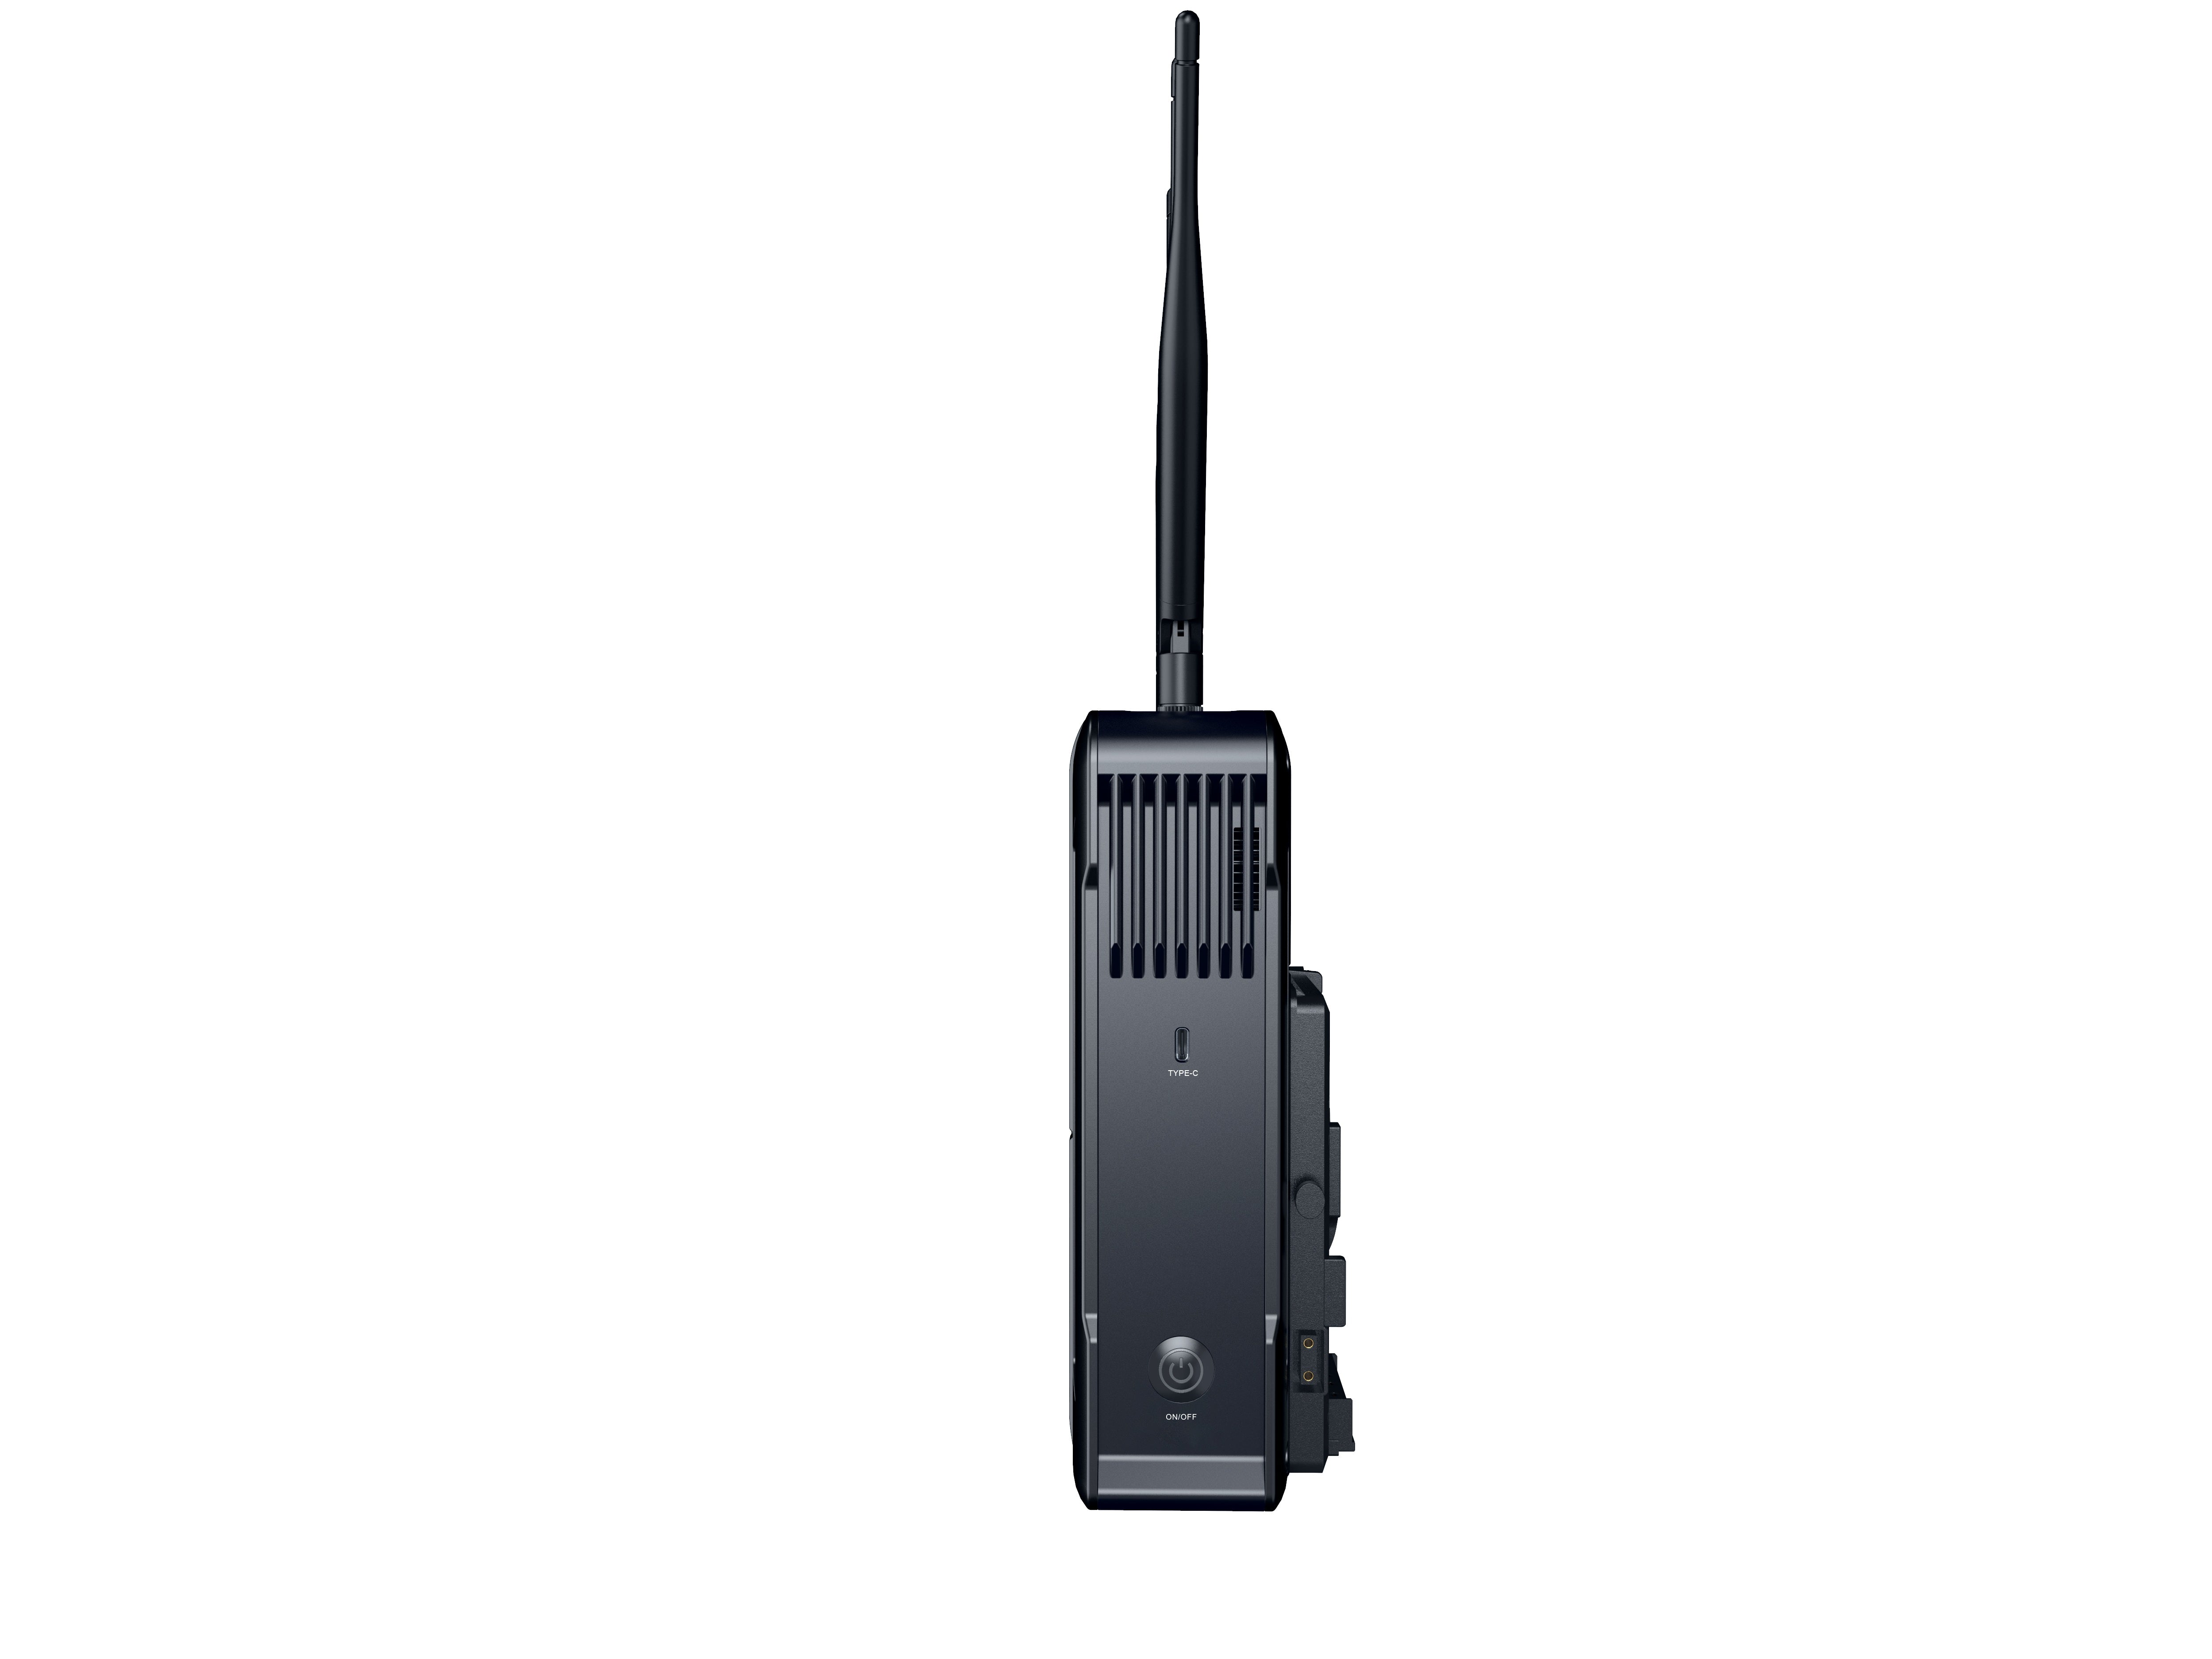 Hollyland  Syscom 421S -4 Transmitter with 1 Receiver 1800ft Video/Audio Transmission System HL-Syscom 421S